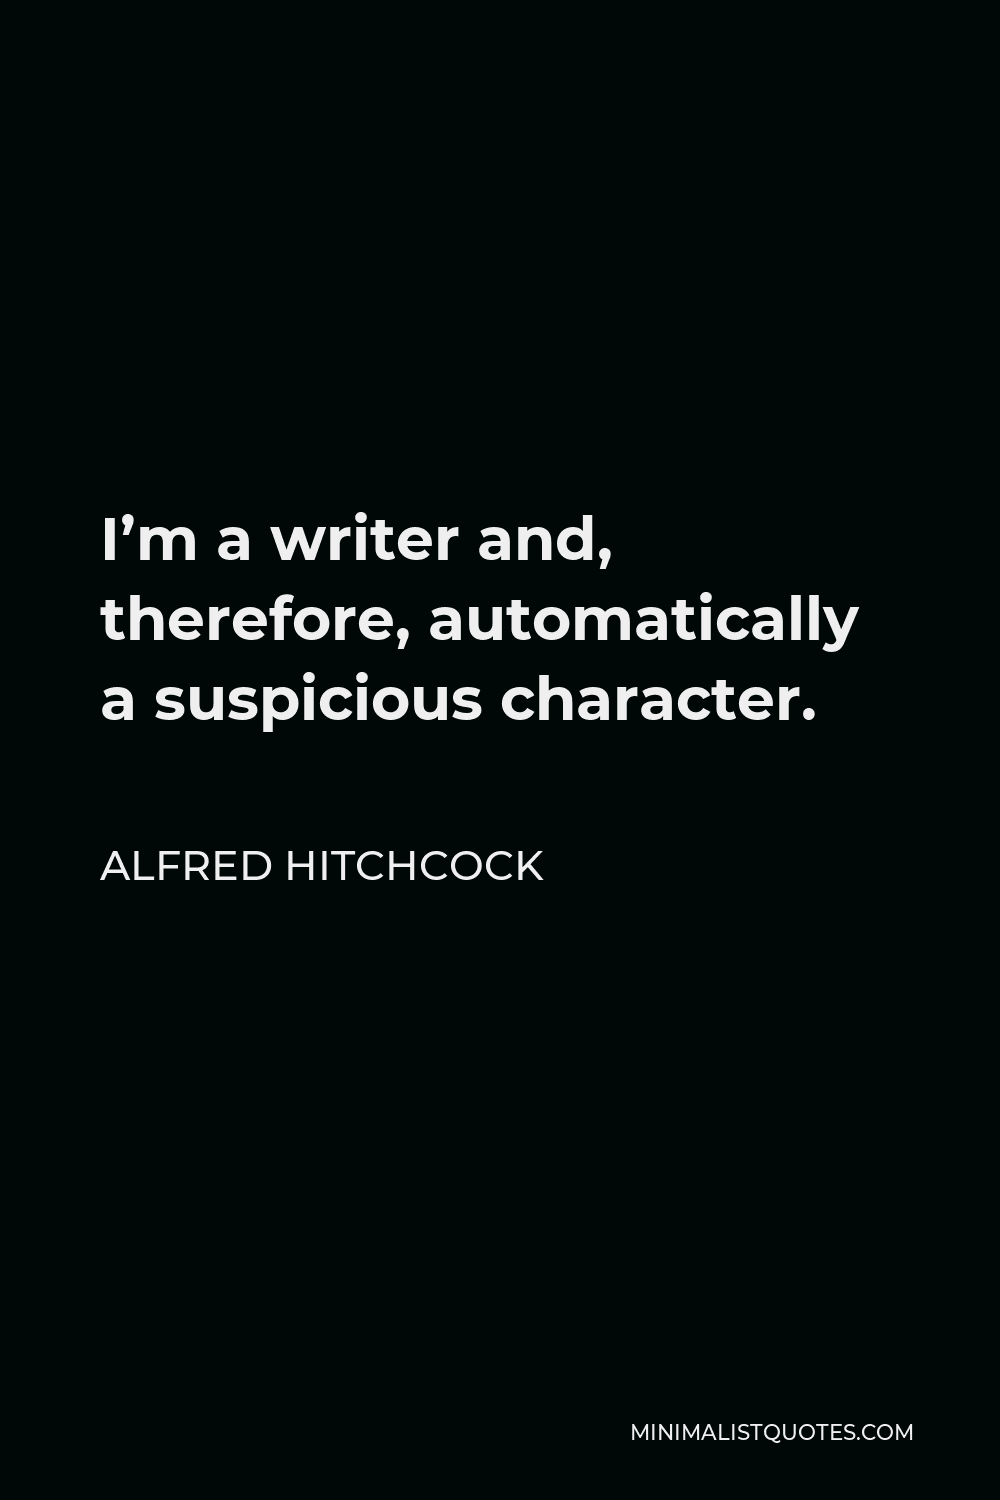 Alfred Hitchcock Quote - I’m a writer and, therefore, automatically a suspicious character.